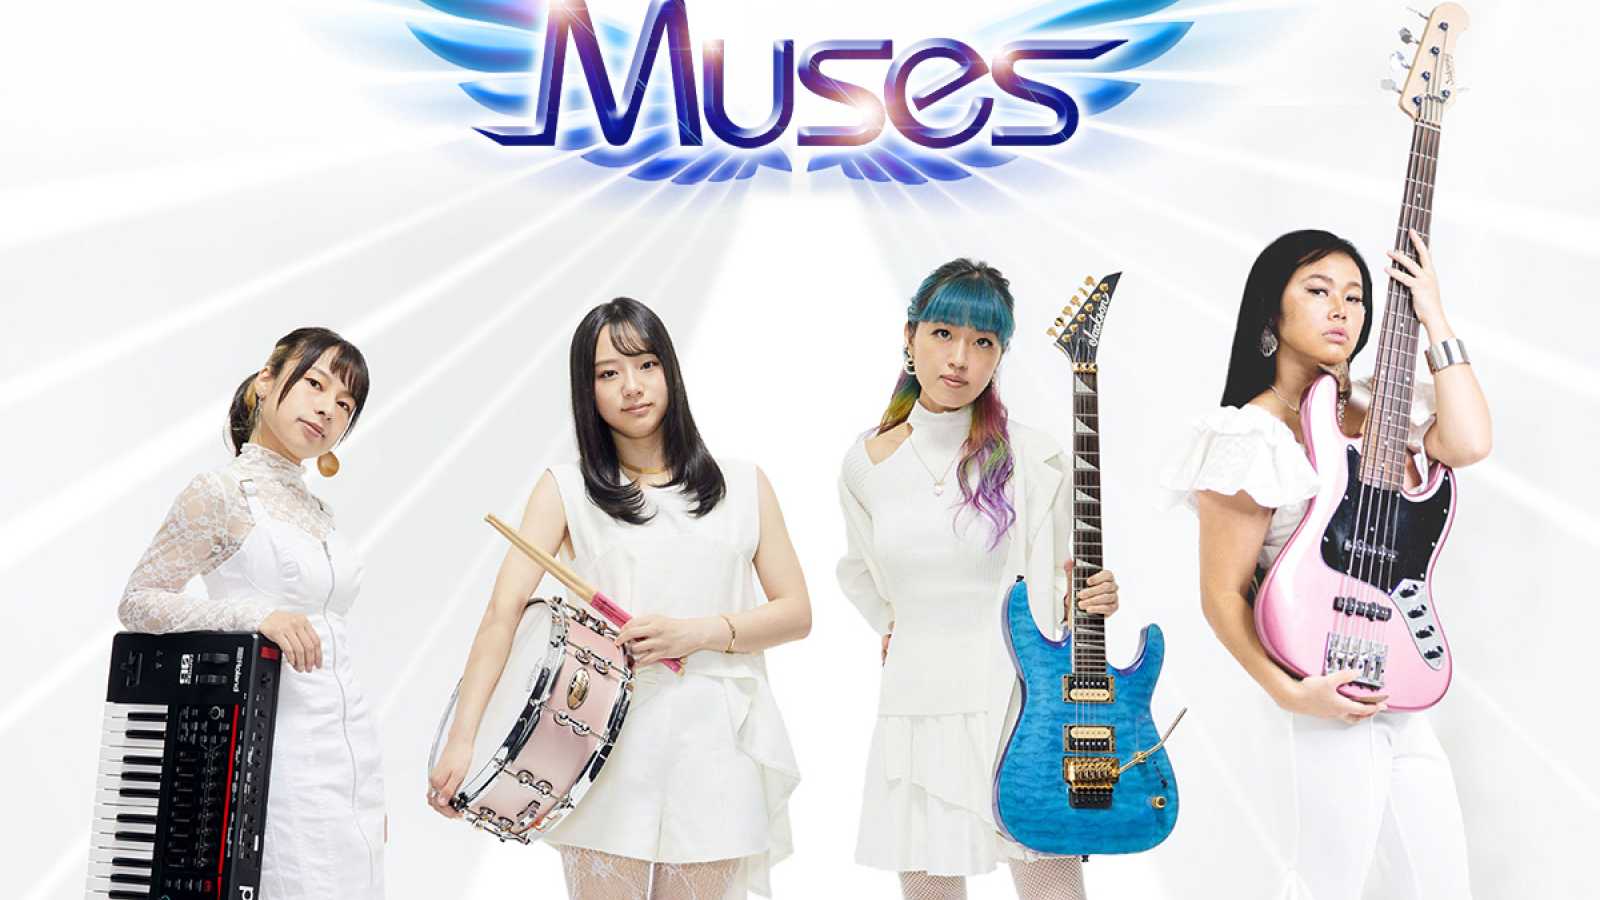 Neue Band: Muses © Poppin Records. All rights reserved.